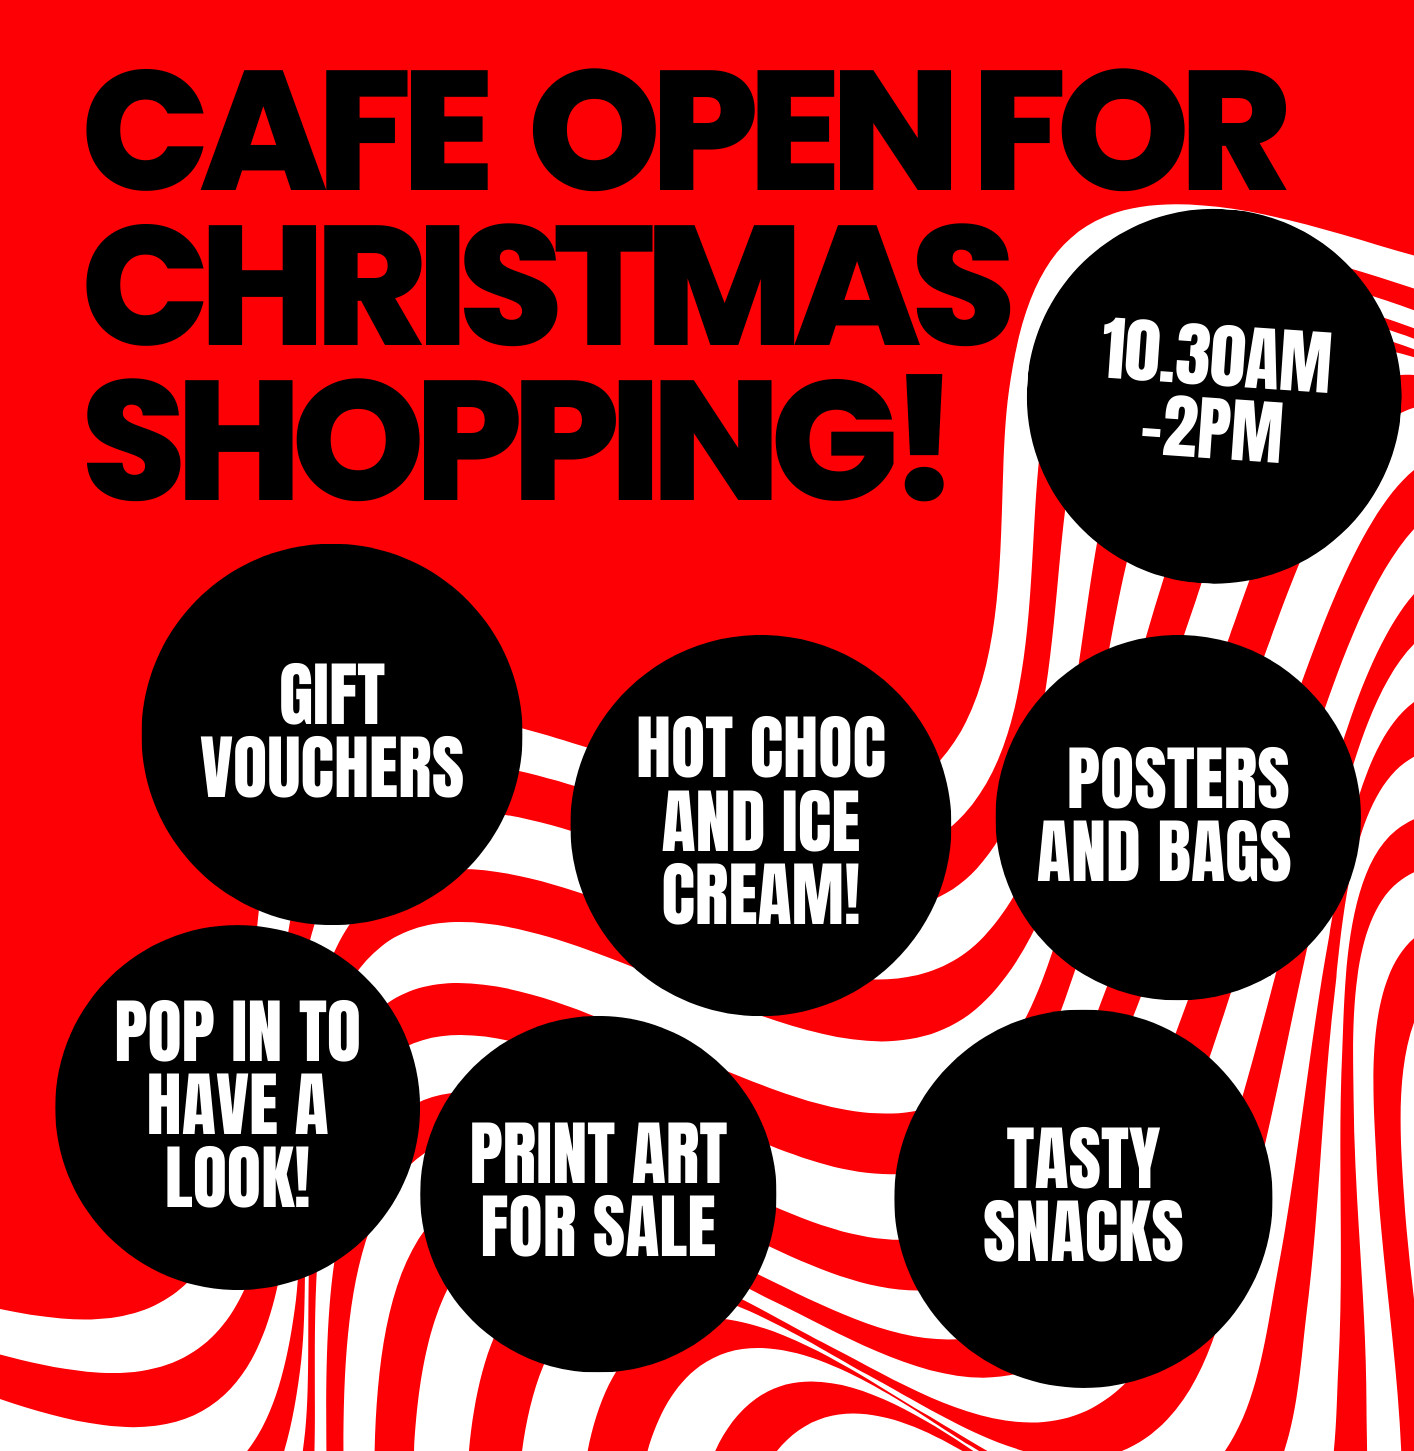 Cafe open for Christmas shopping